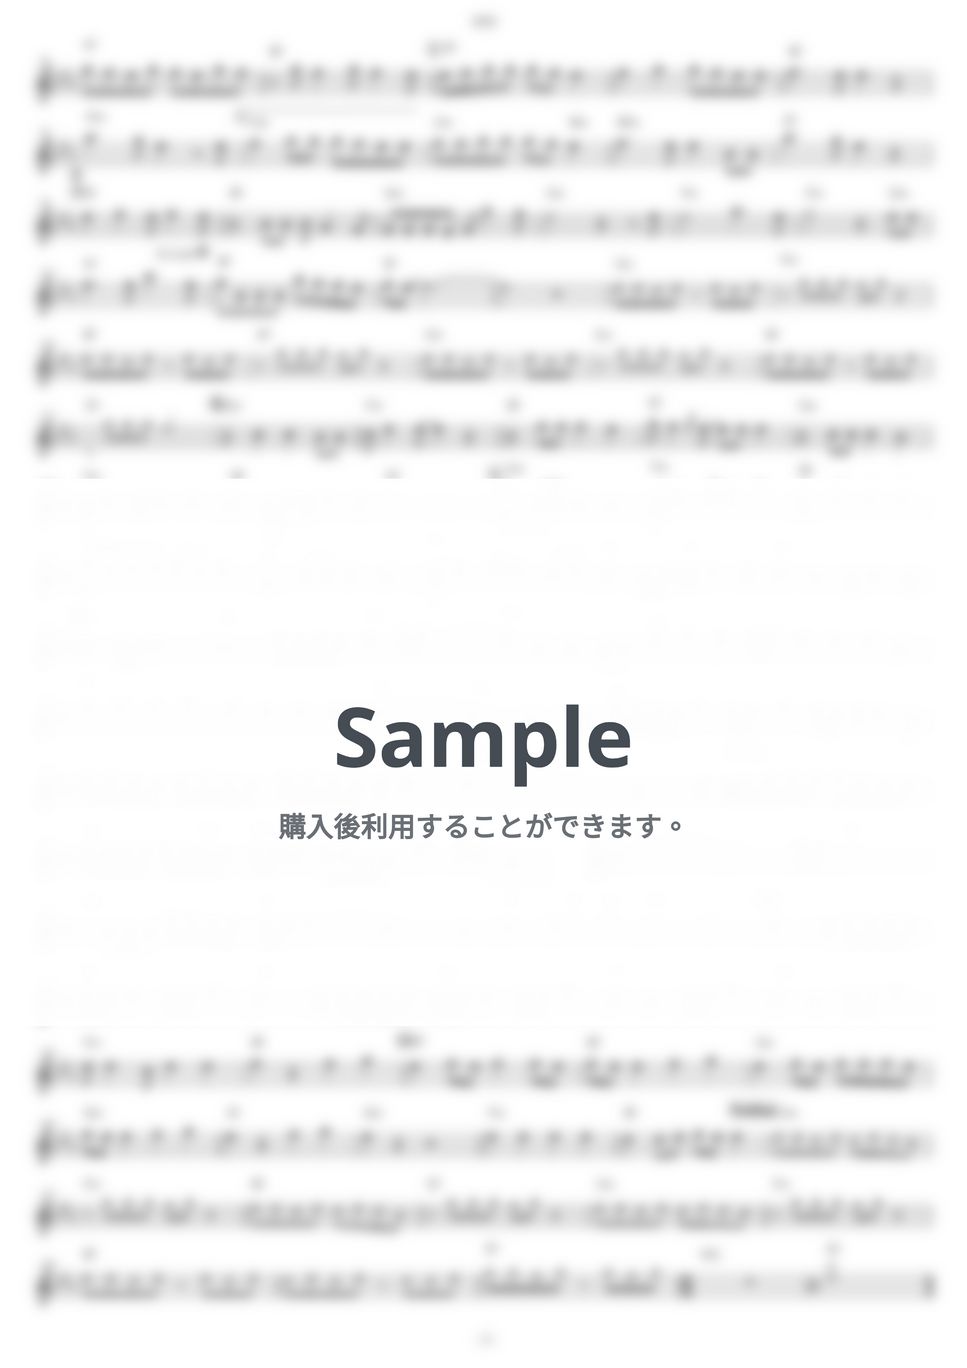 WANIMA - GONG (『ONE PIECE STAMPEDE』 / in Eb) by muta-sax